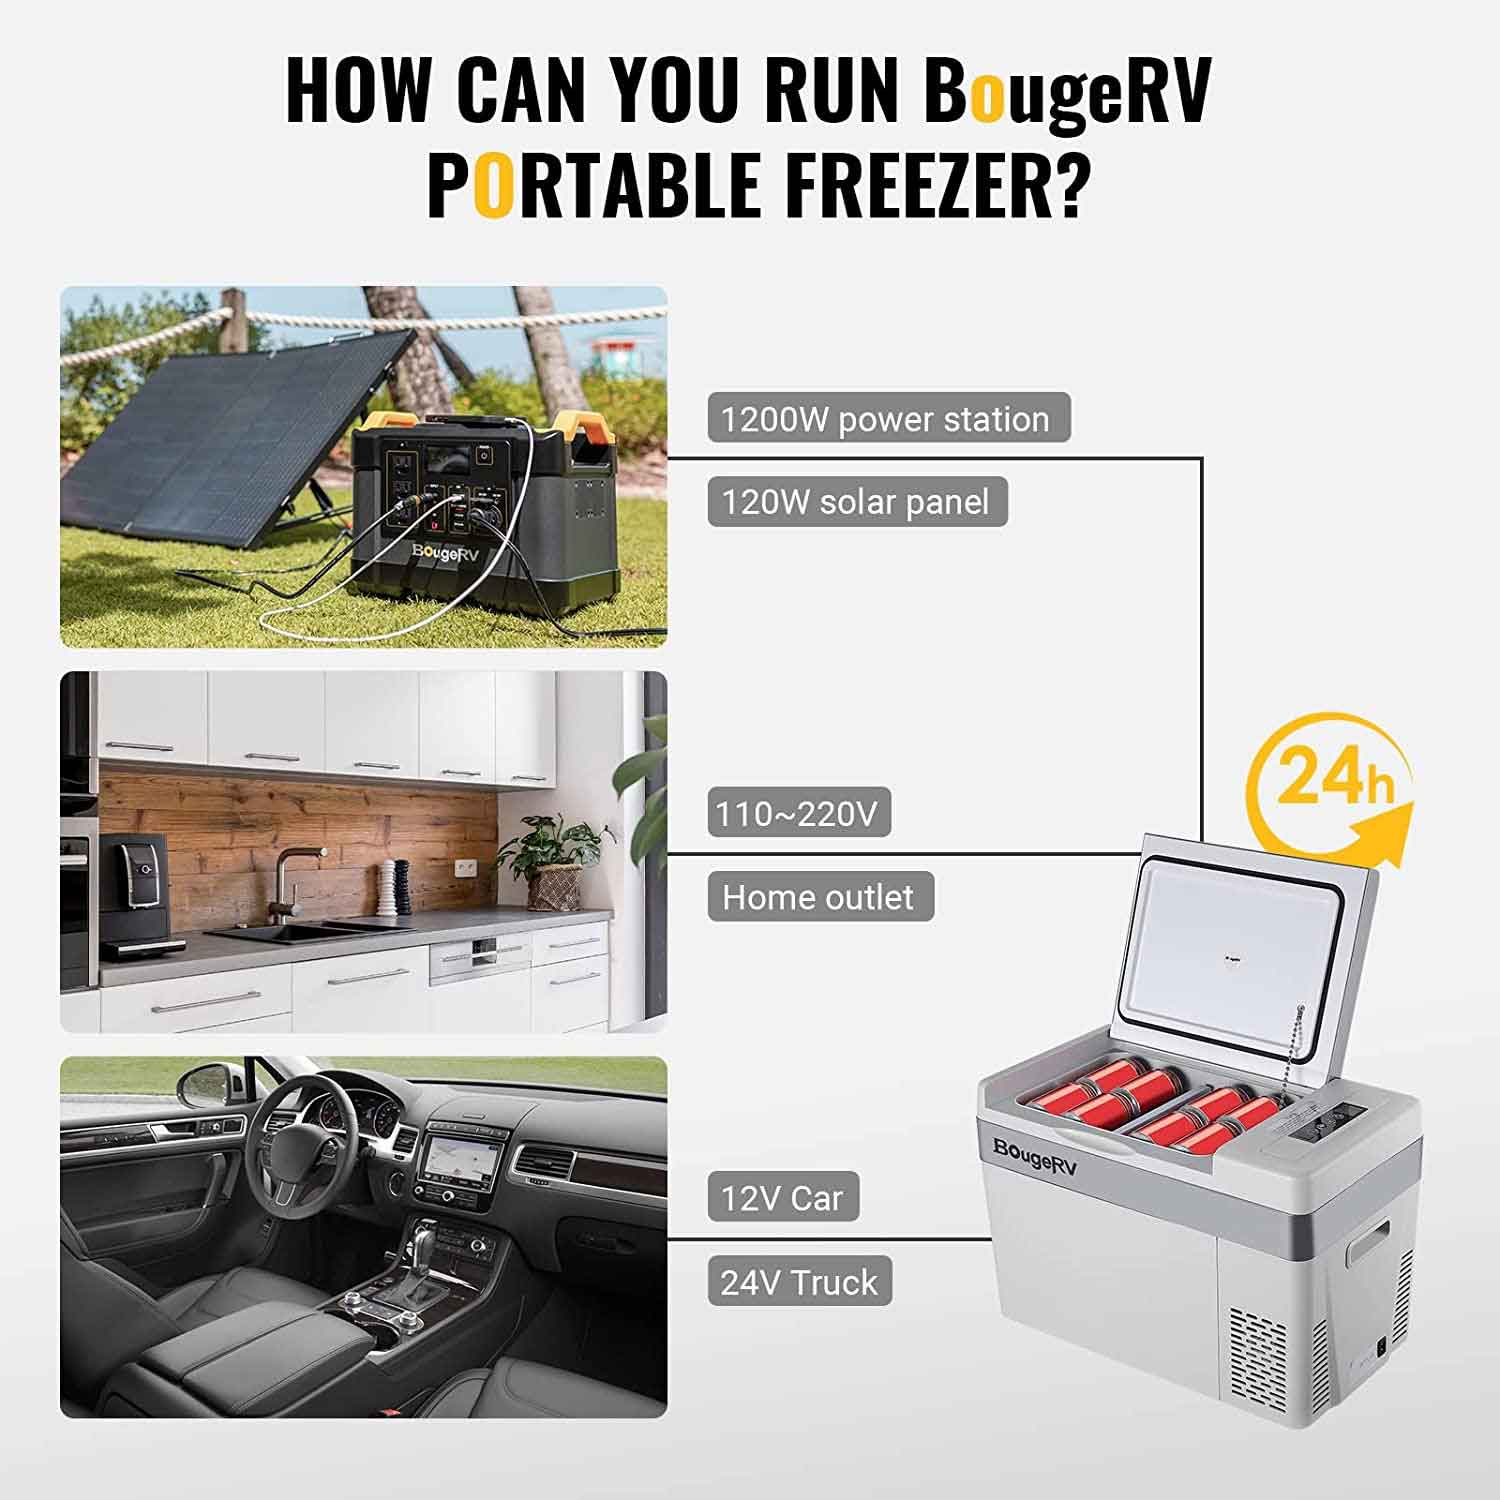 how to run bougerv portable freezer